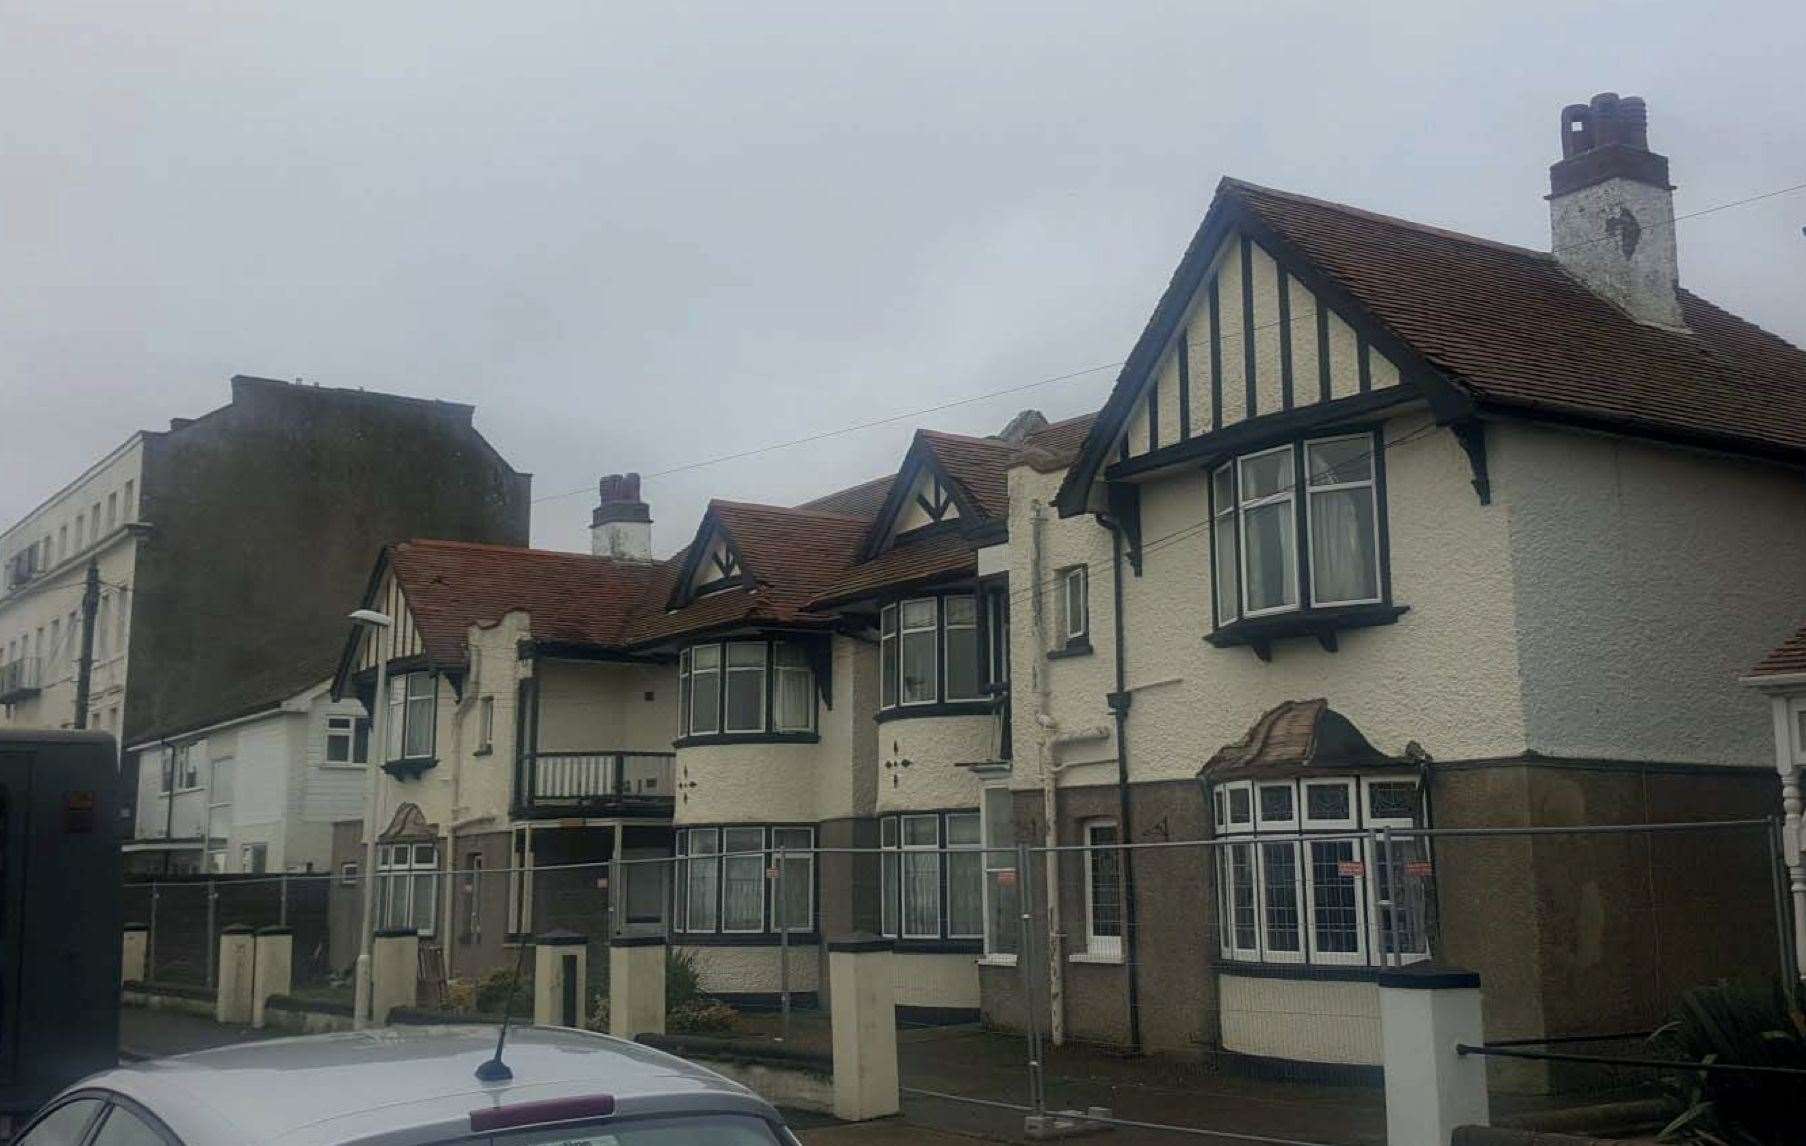 The site previously housed St Benedicts care home, which fell into disrepair and misuse after the facility closed.